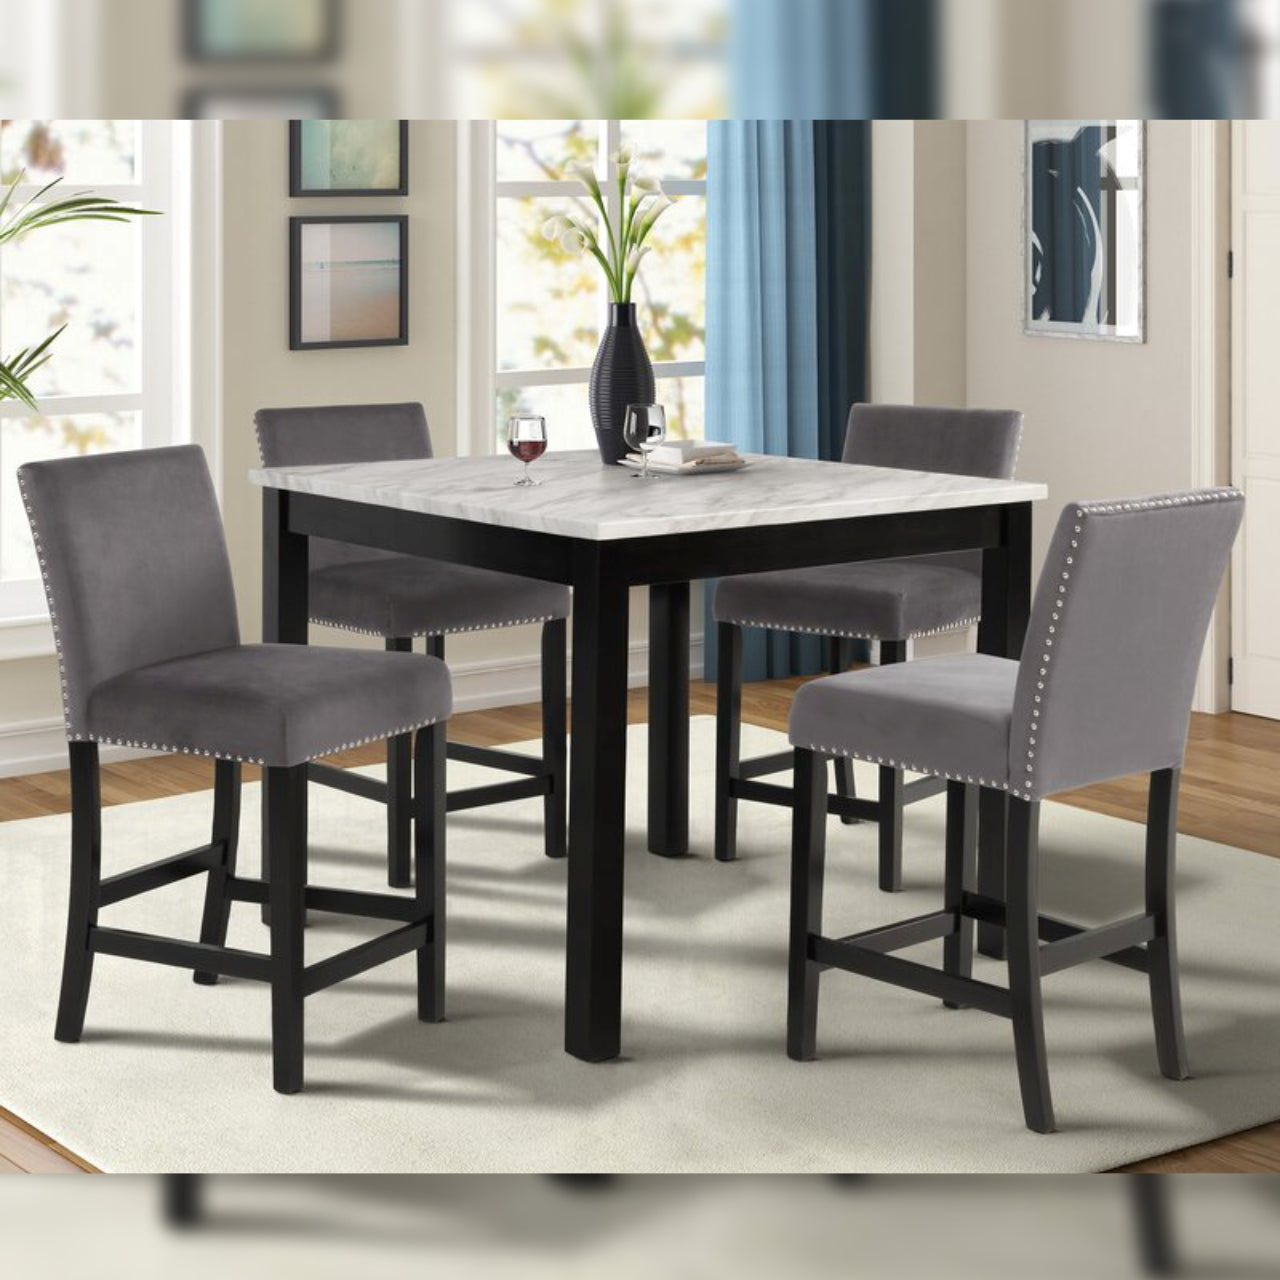 Dining Set   4 - Person Counter Height Dining Set